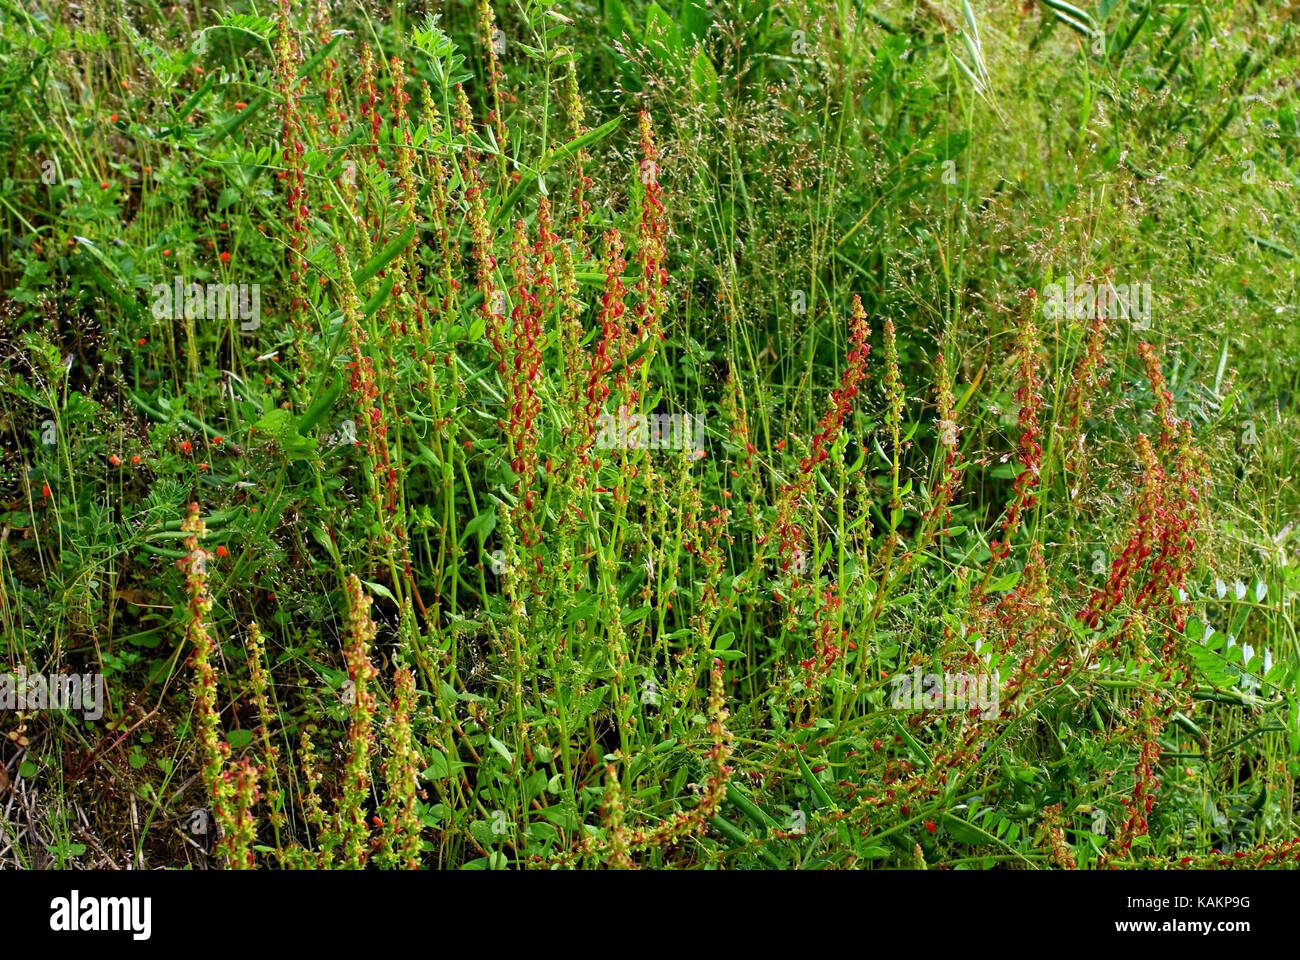 a wild plant in a meadow: Rumex bucephalophorus, the Red dock or Thorned dock, from the family Polygonaceae Stock Photo